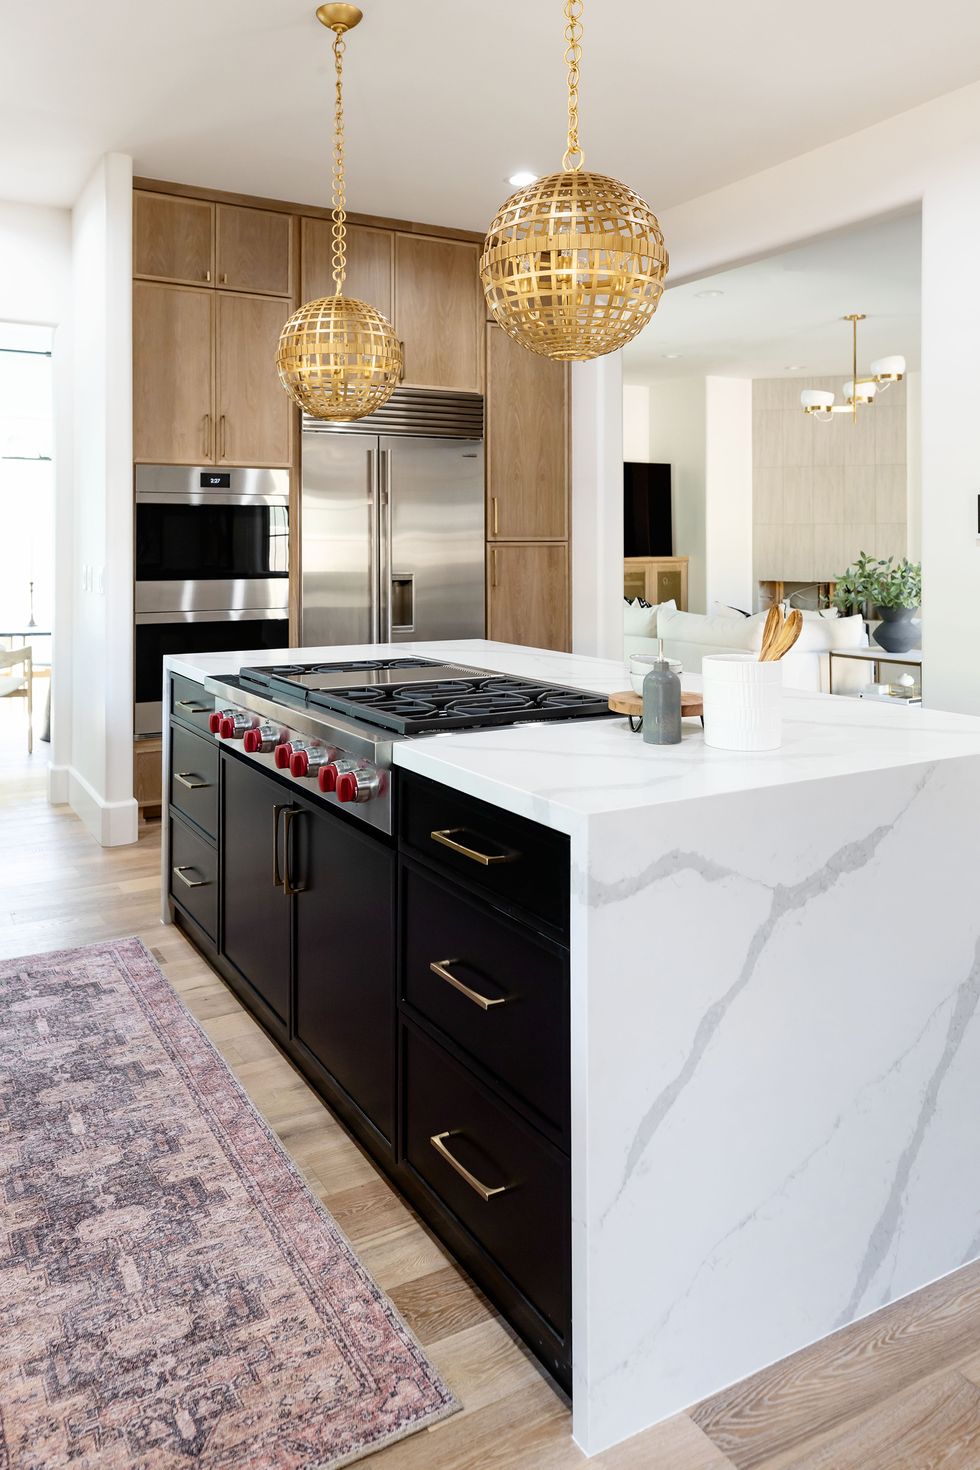 Bold kitchen colors with white marble countertop, black cabinets and wooden cabinet combination.